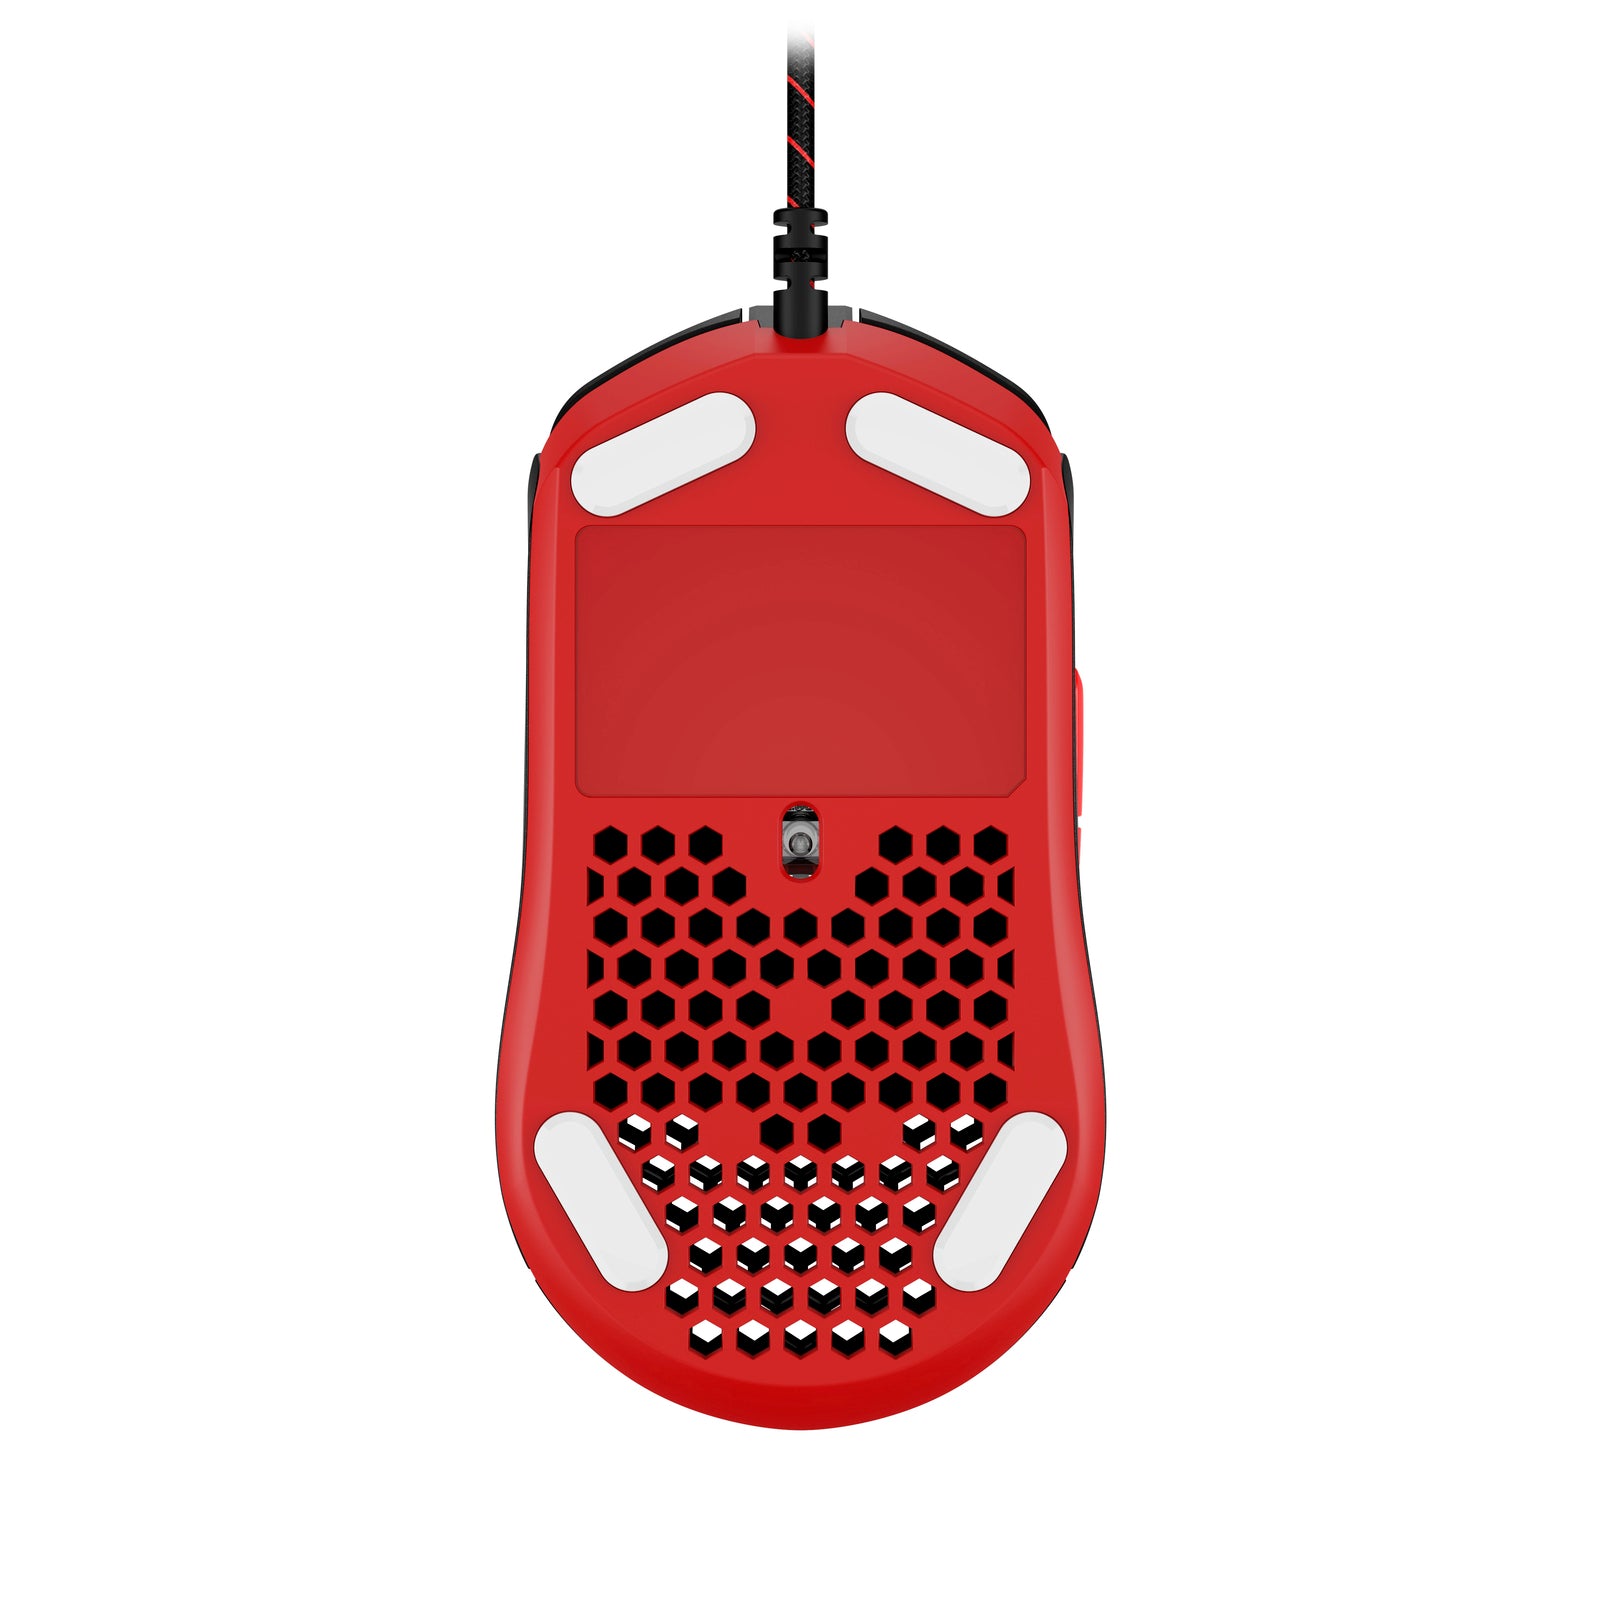 HyperX Pulsefire Haste Red-Black Gaming Mouse - view of the bottom side